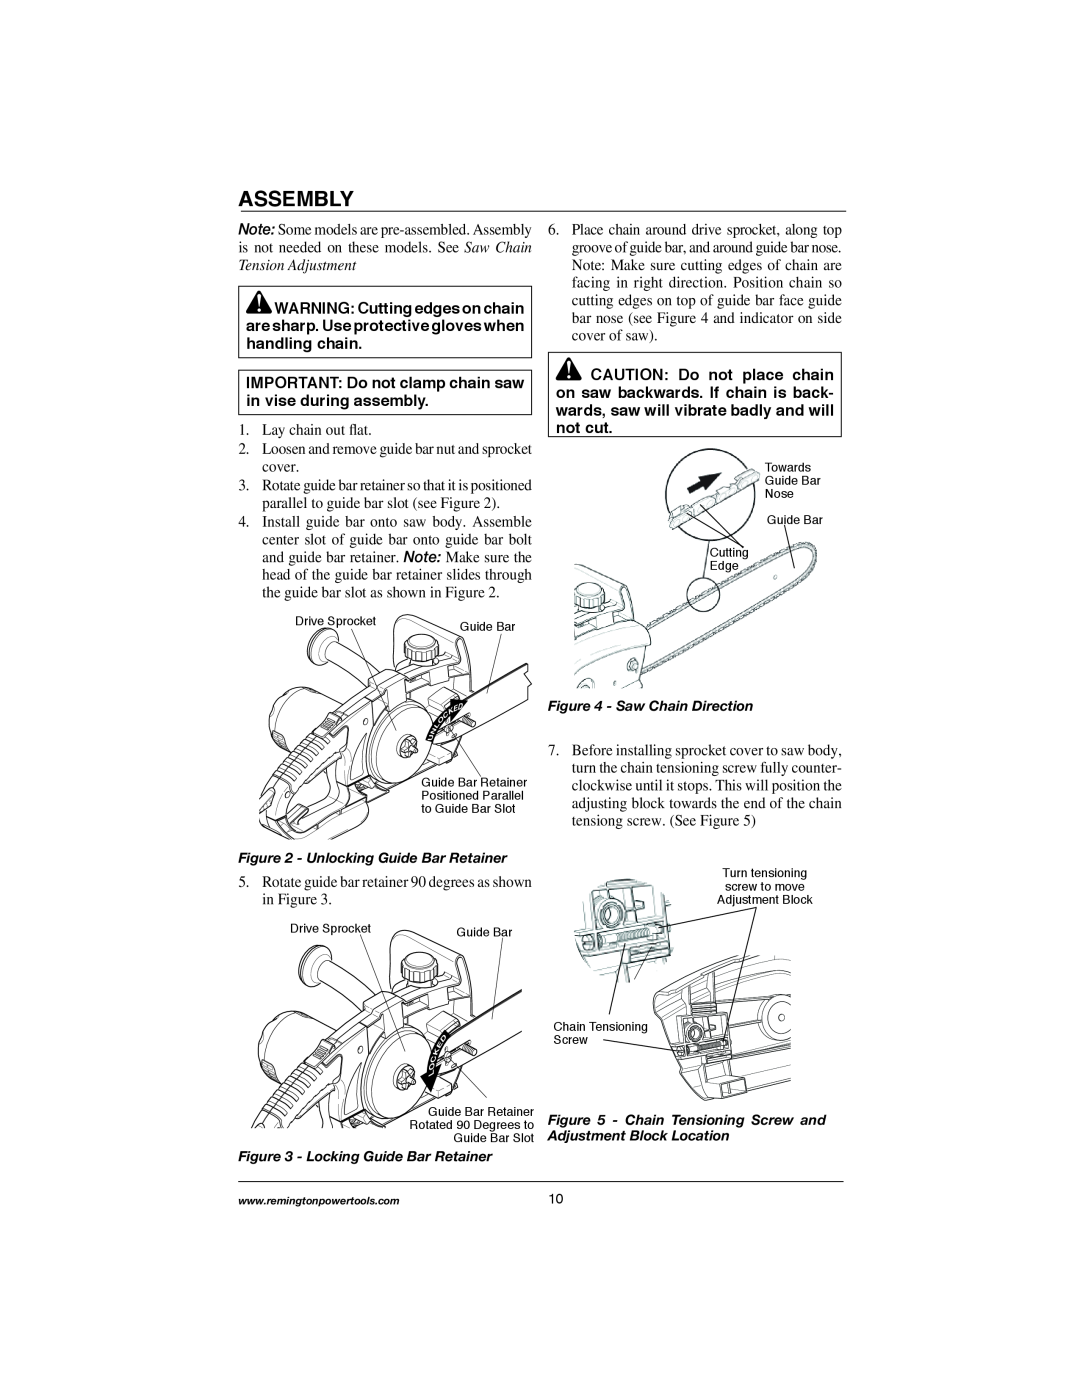 Remington Power Tools M30016US, M30016AS, M15014AS, M15012US, M35016AW, M30016AW owner manual Assembly 